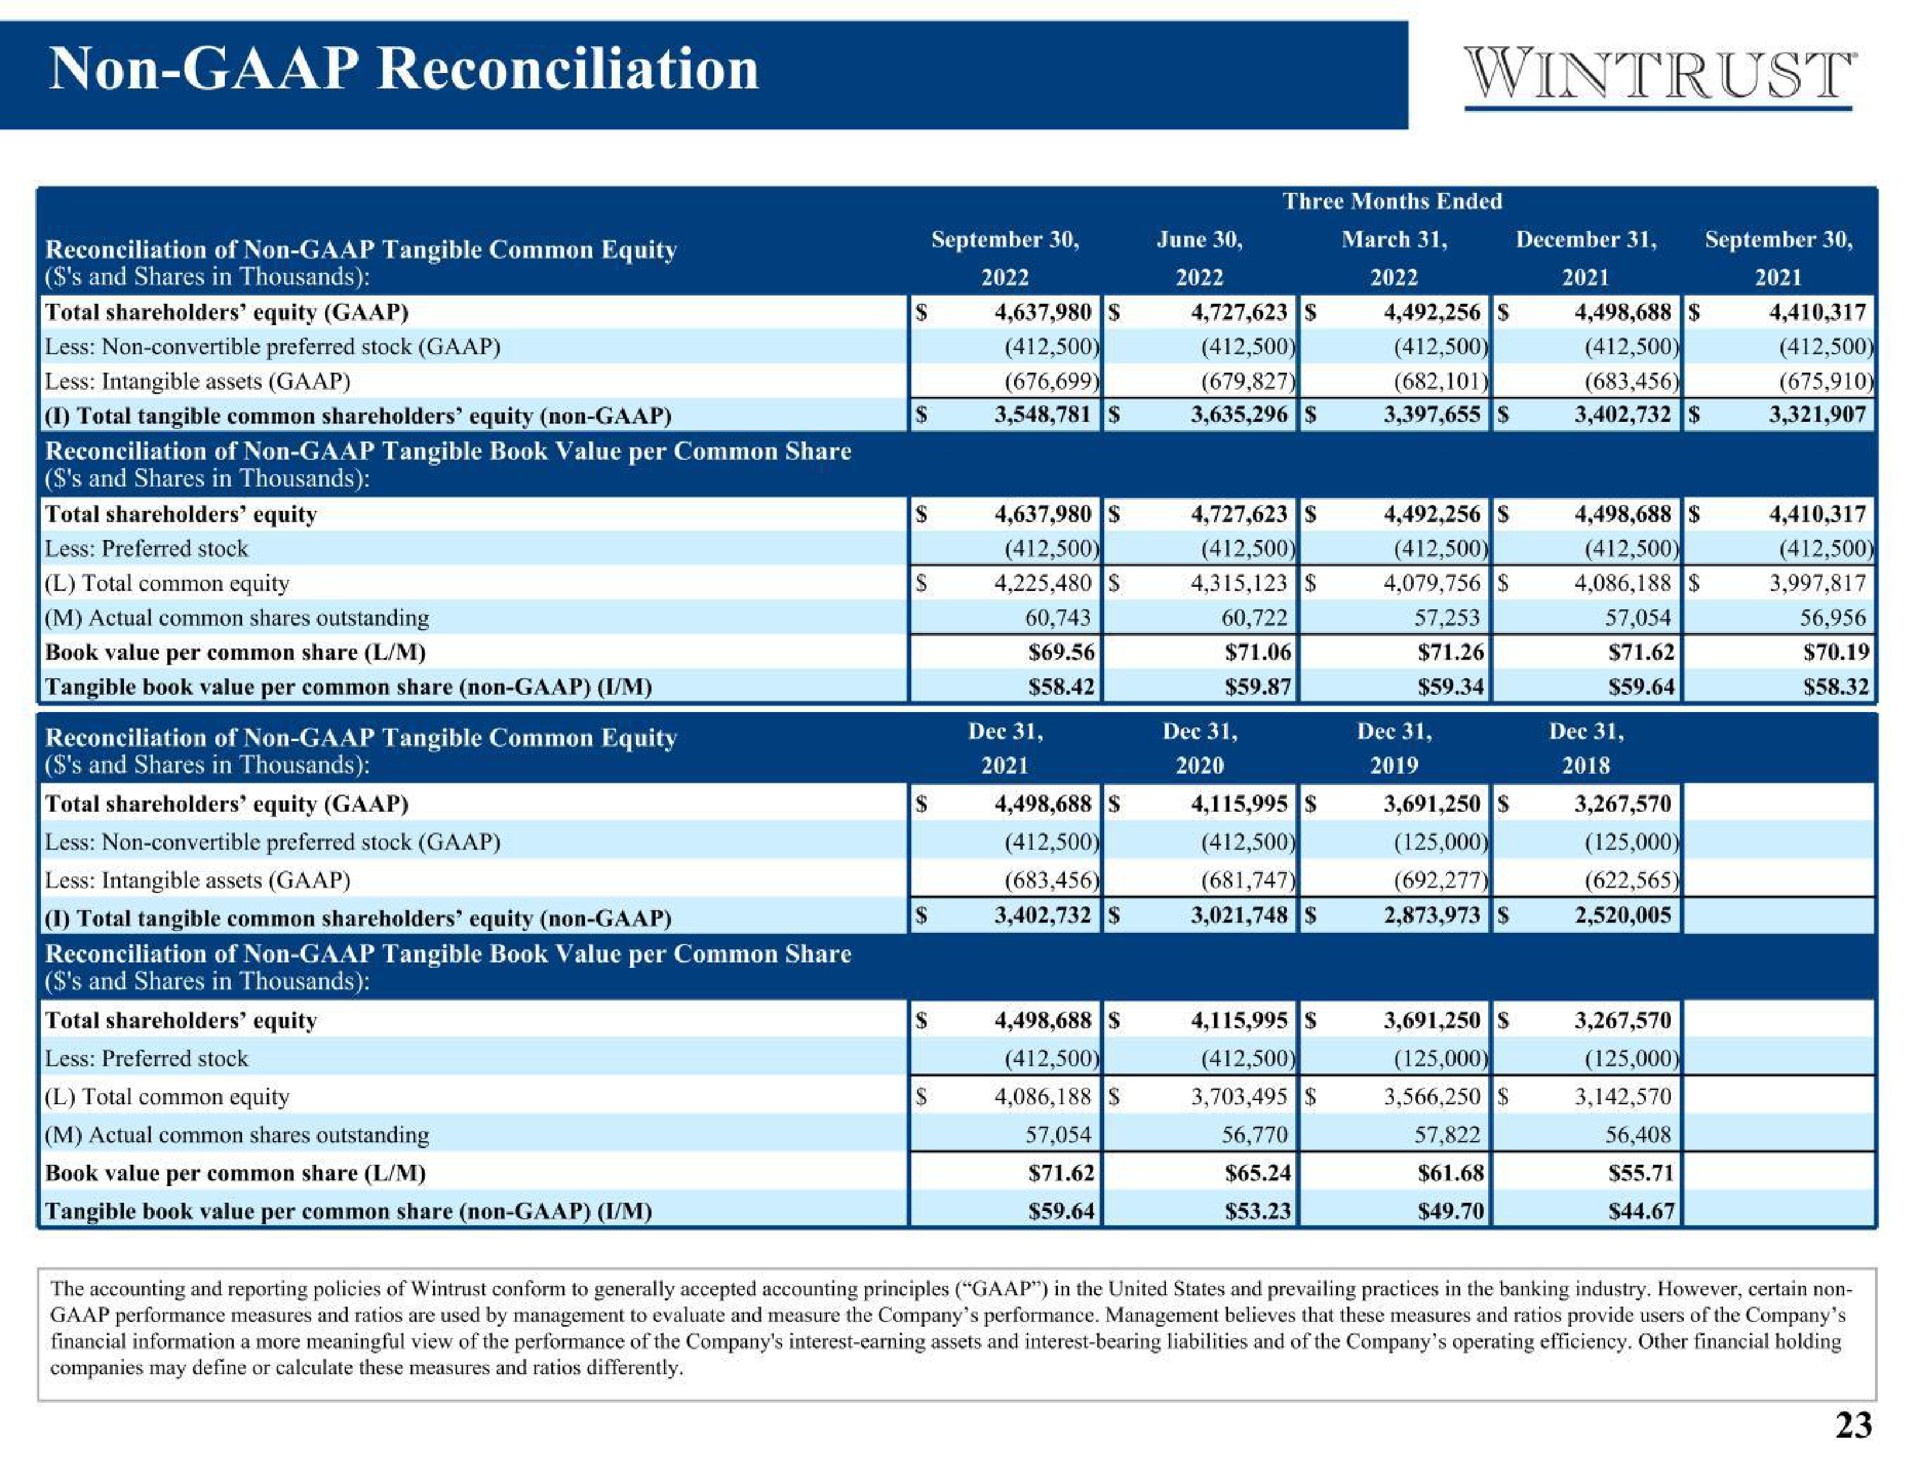 non reconciliation total shareholders equity | Wintrust Financial